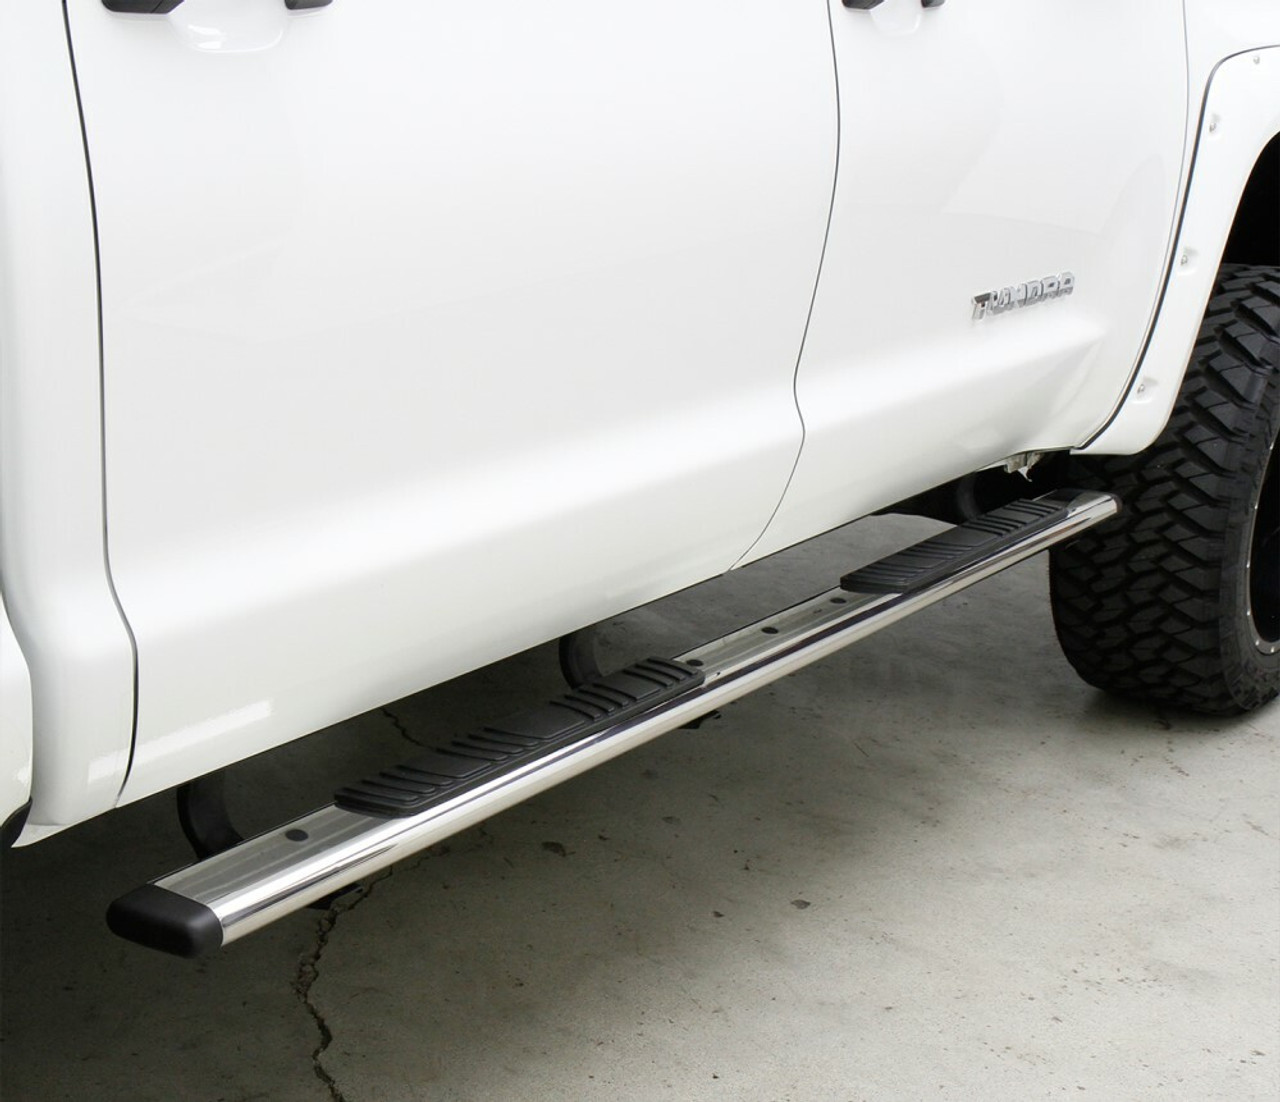 Go Rhino 685404787PS Chevrolet, Silverado 2500HD, 3500HD, 2020 - 2021, 5 inch OE Xtreme Low Profile - Complete Kit: Stainless steel, Polished, 650087PS side bars + 6840475 OE Xtreme Brackets. 5 inch x 87 inch bars, New Body Style Only